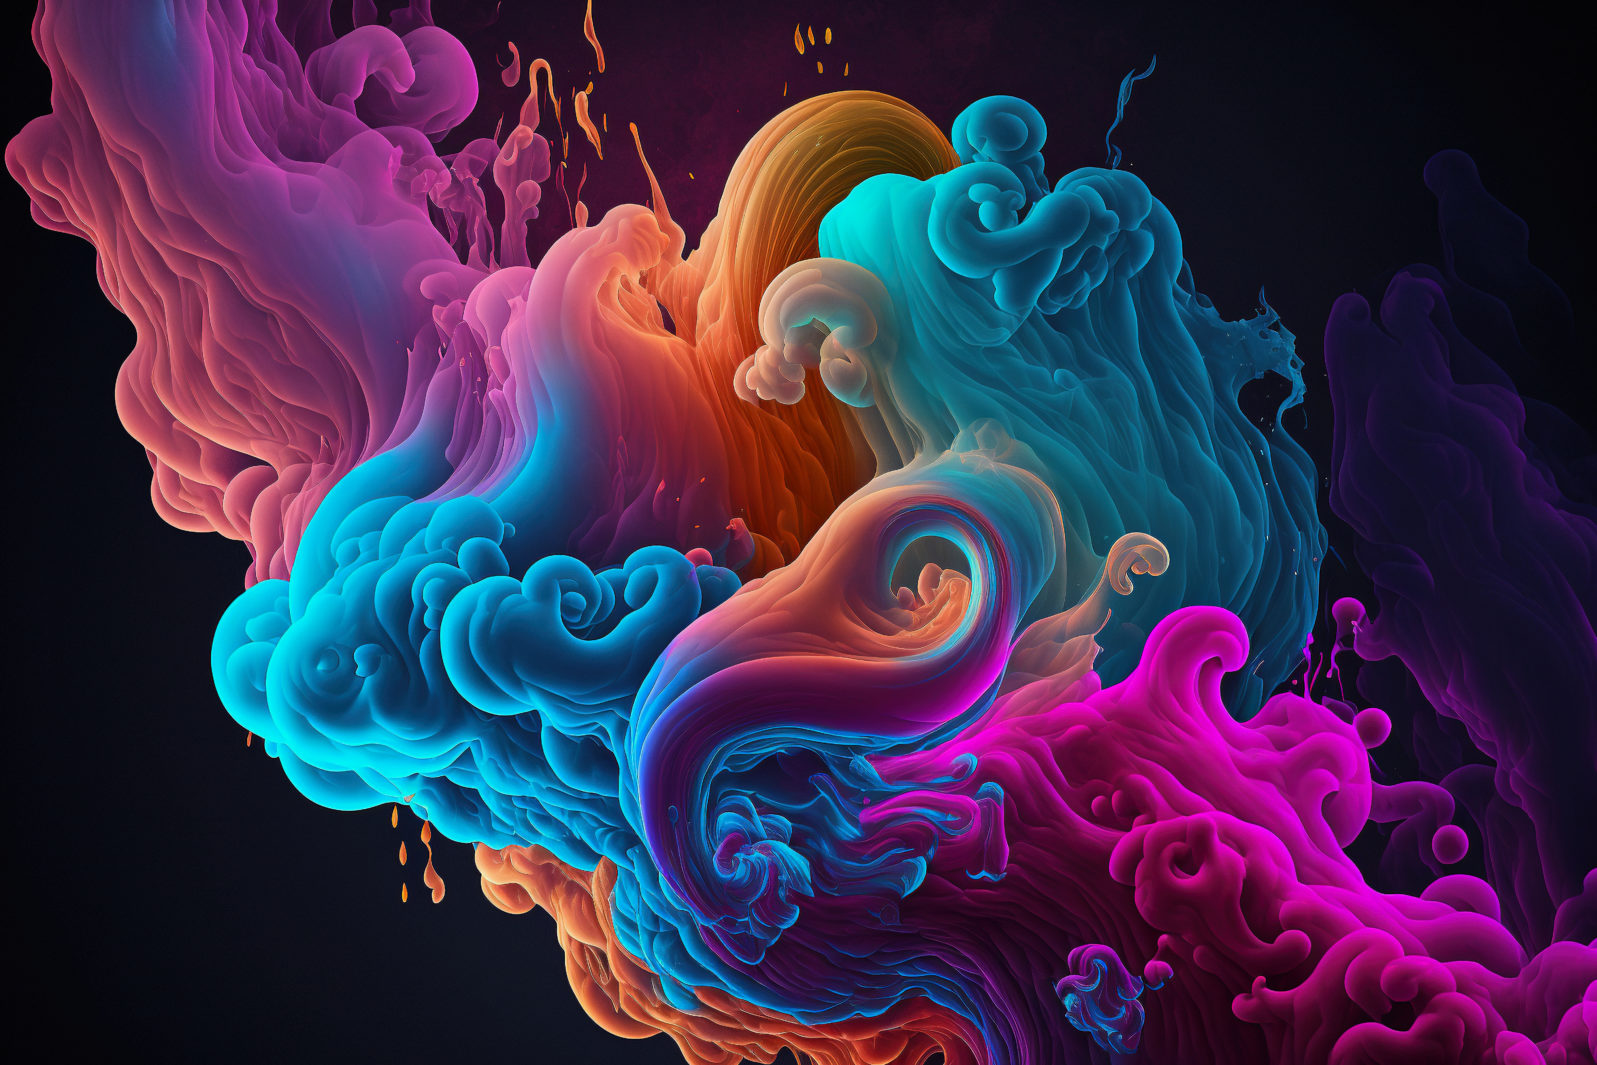 abstract ai generated illustration of a colored floating liquid in the trend colors pink, orange, blue and violet